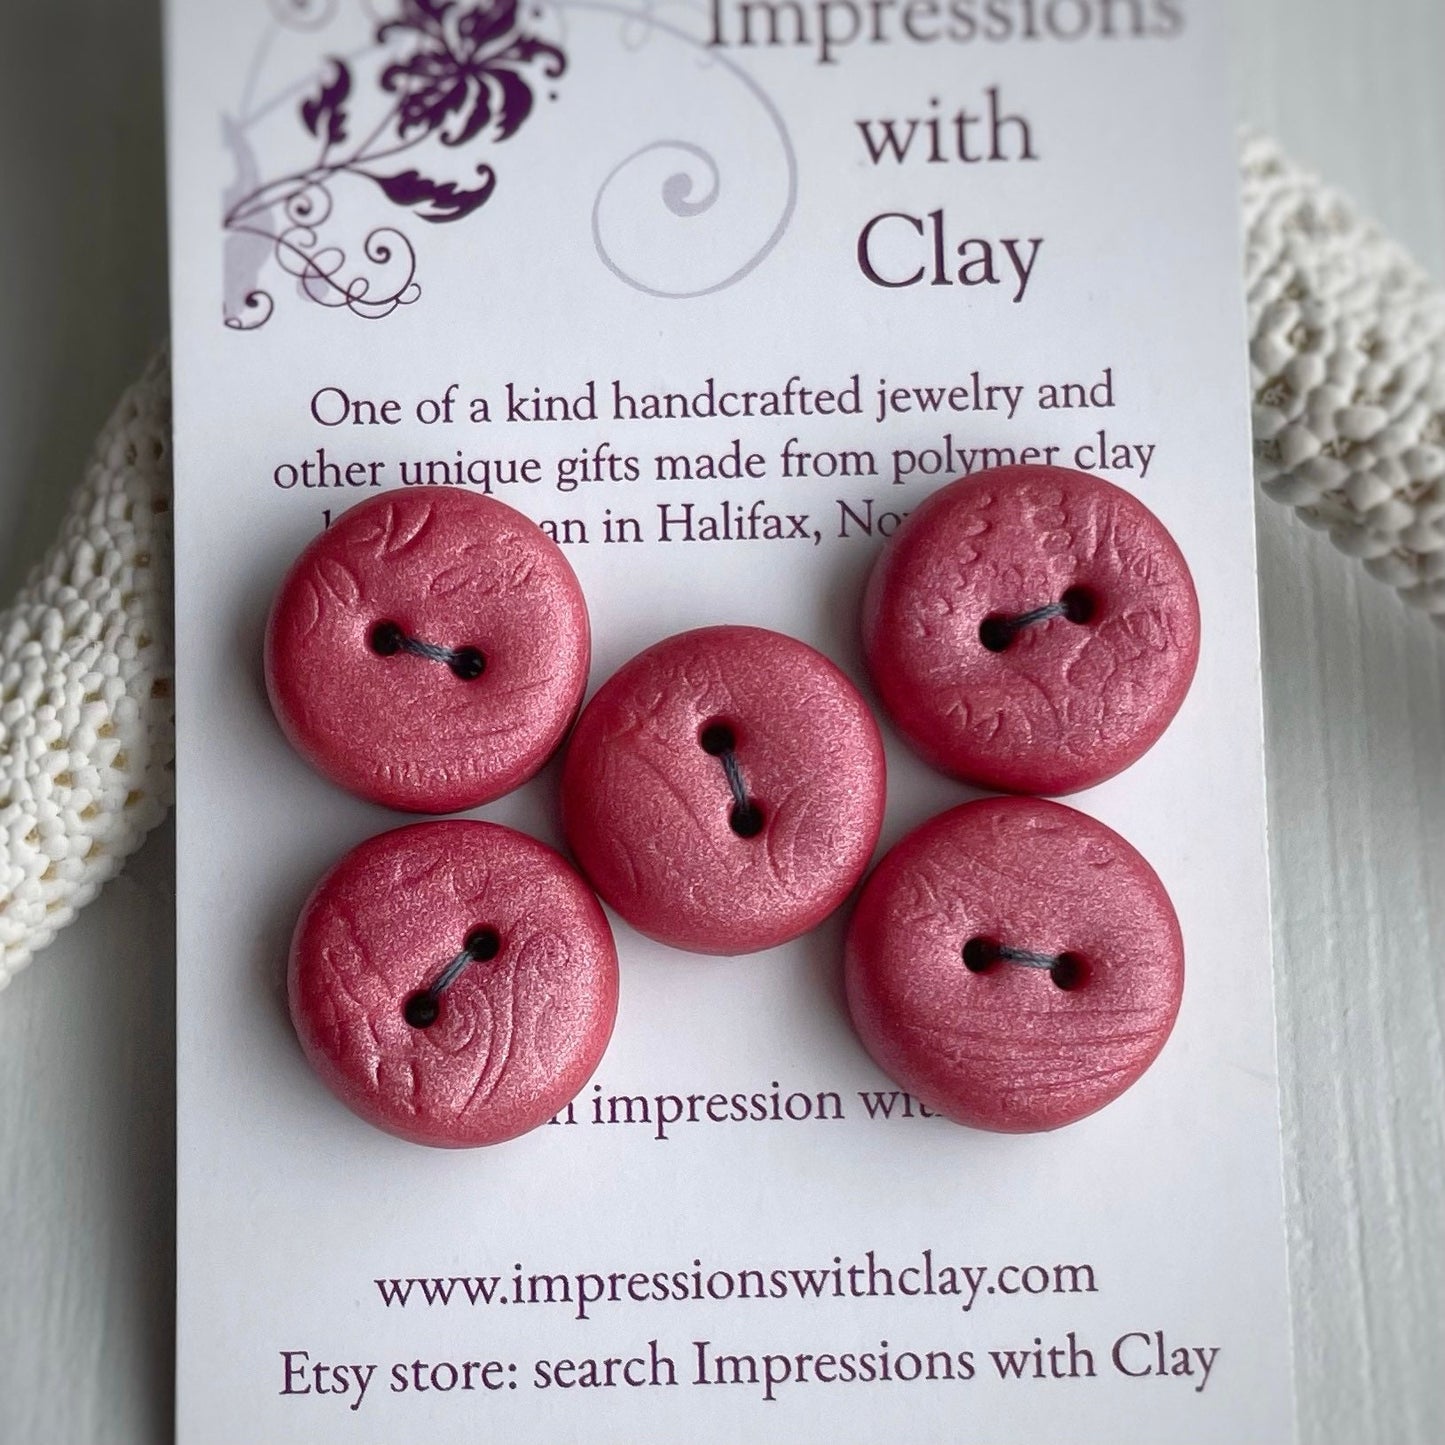 Small ~15mm - Peach Round Polymer Clay Buttons with Impression - set of 5